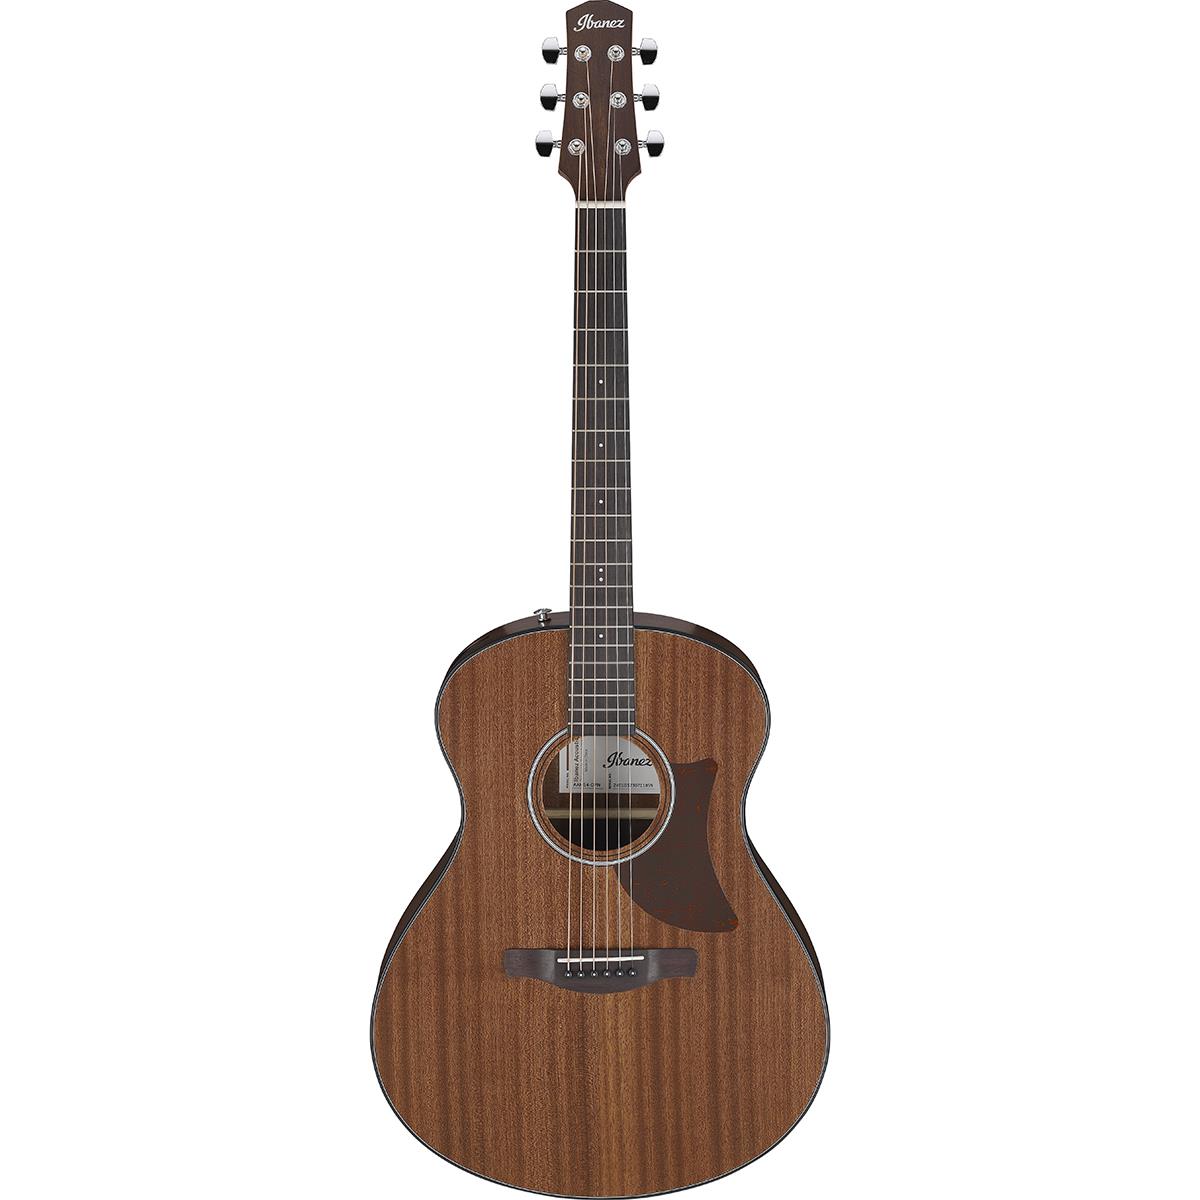 Image of Ibanez Advanced Acoustic Series AAM54 Acoustic Guitar